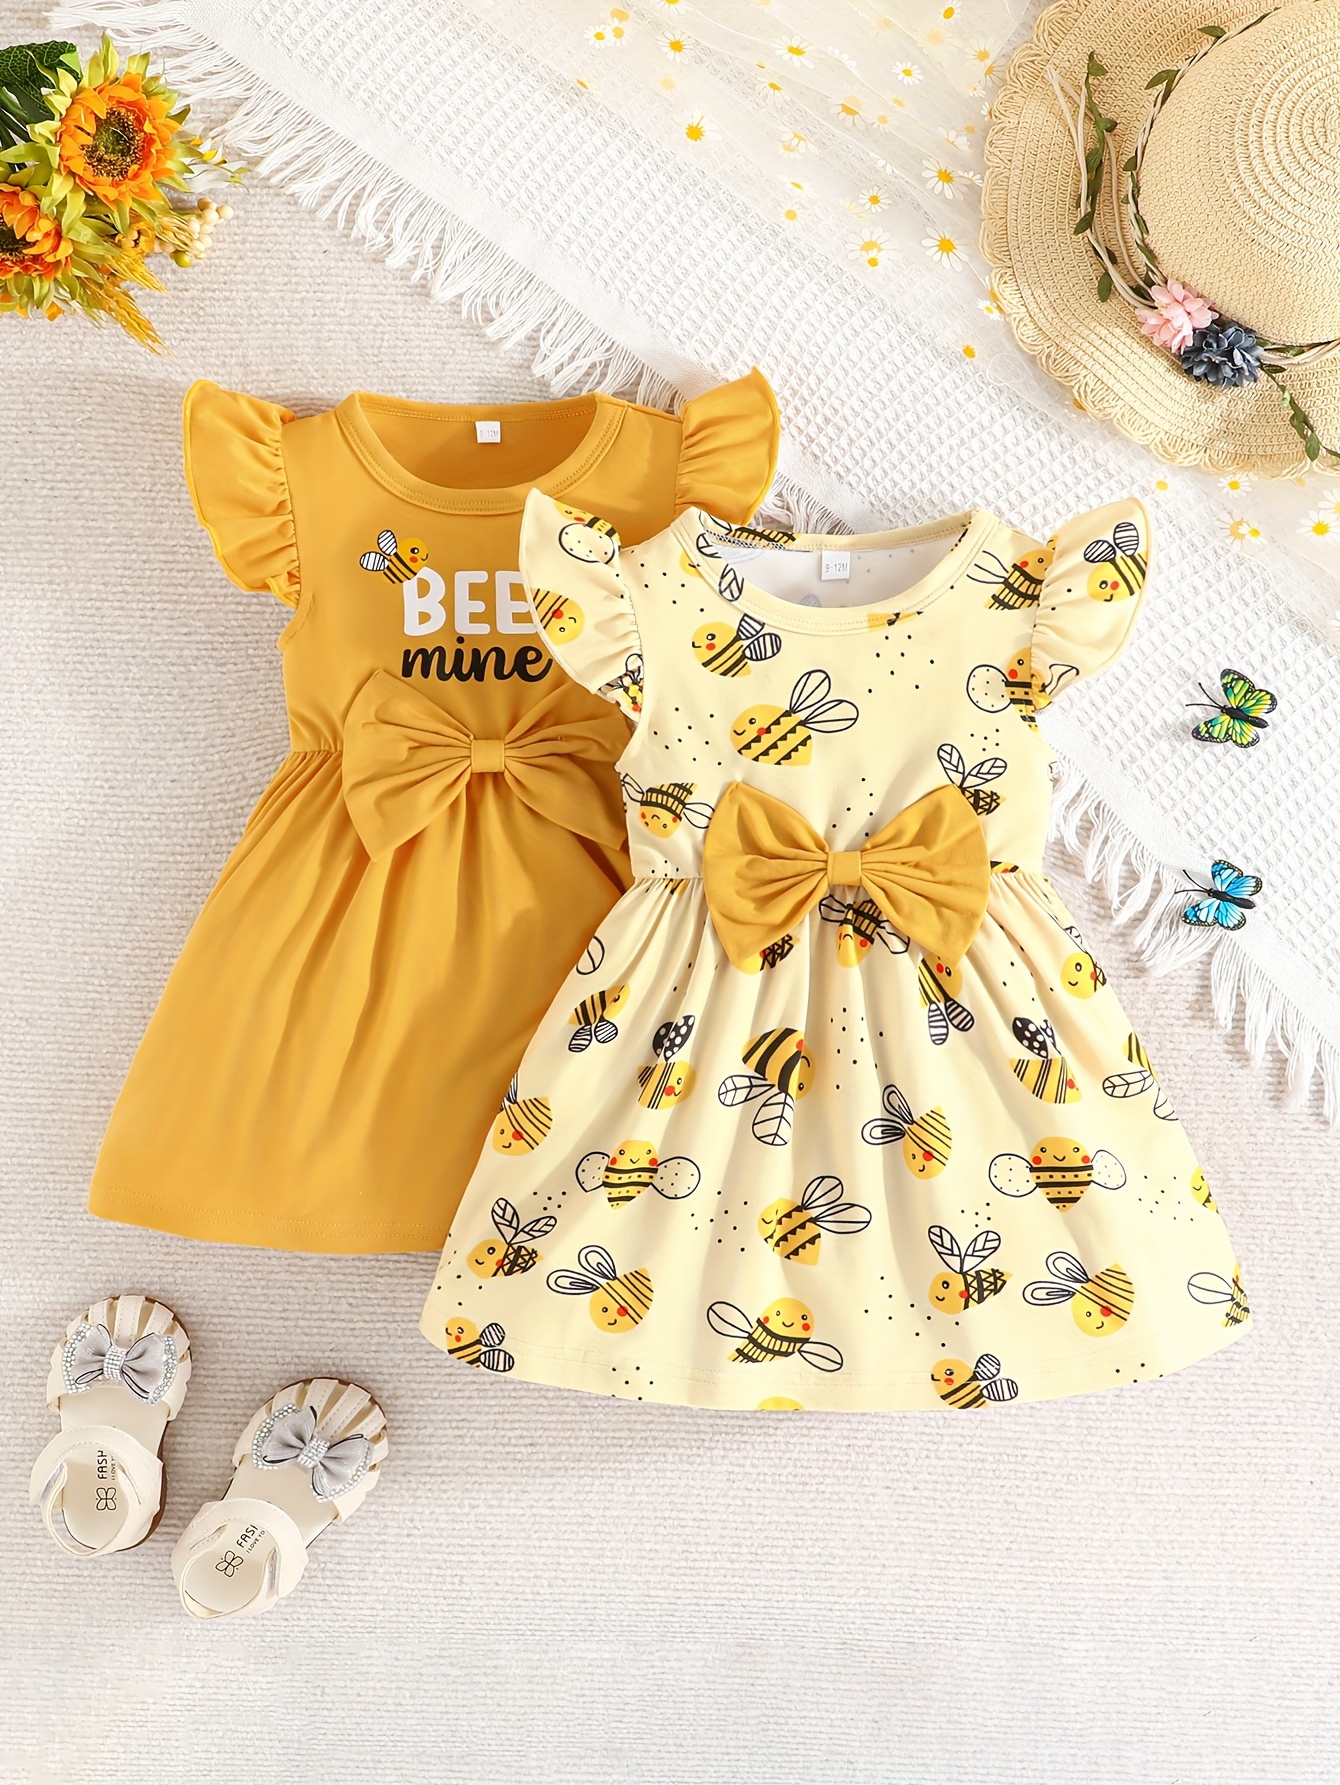 2pcs Cute Kids Baby Girls Clothes Set Children Girl Clothing Outfits Long  Sleeve Mouse Pattern T-shirt +rompers